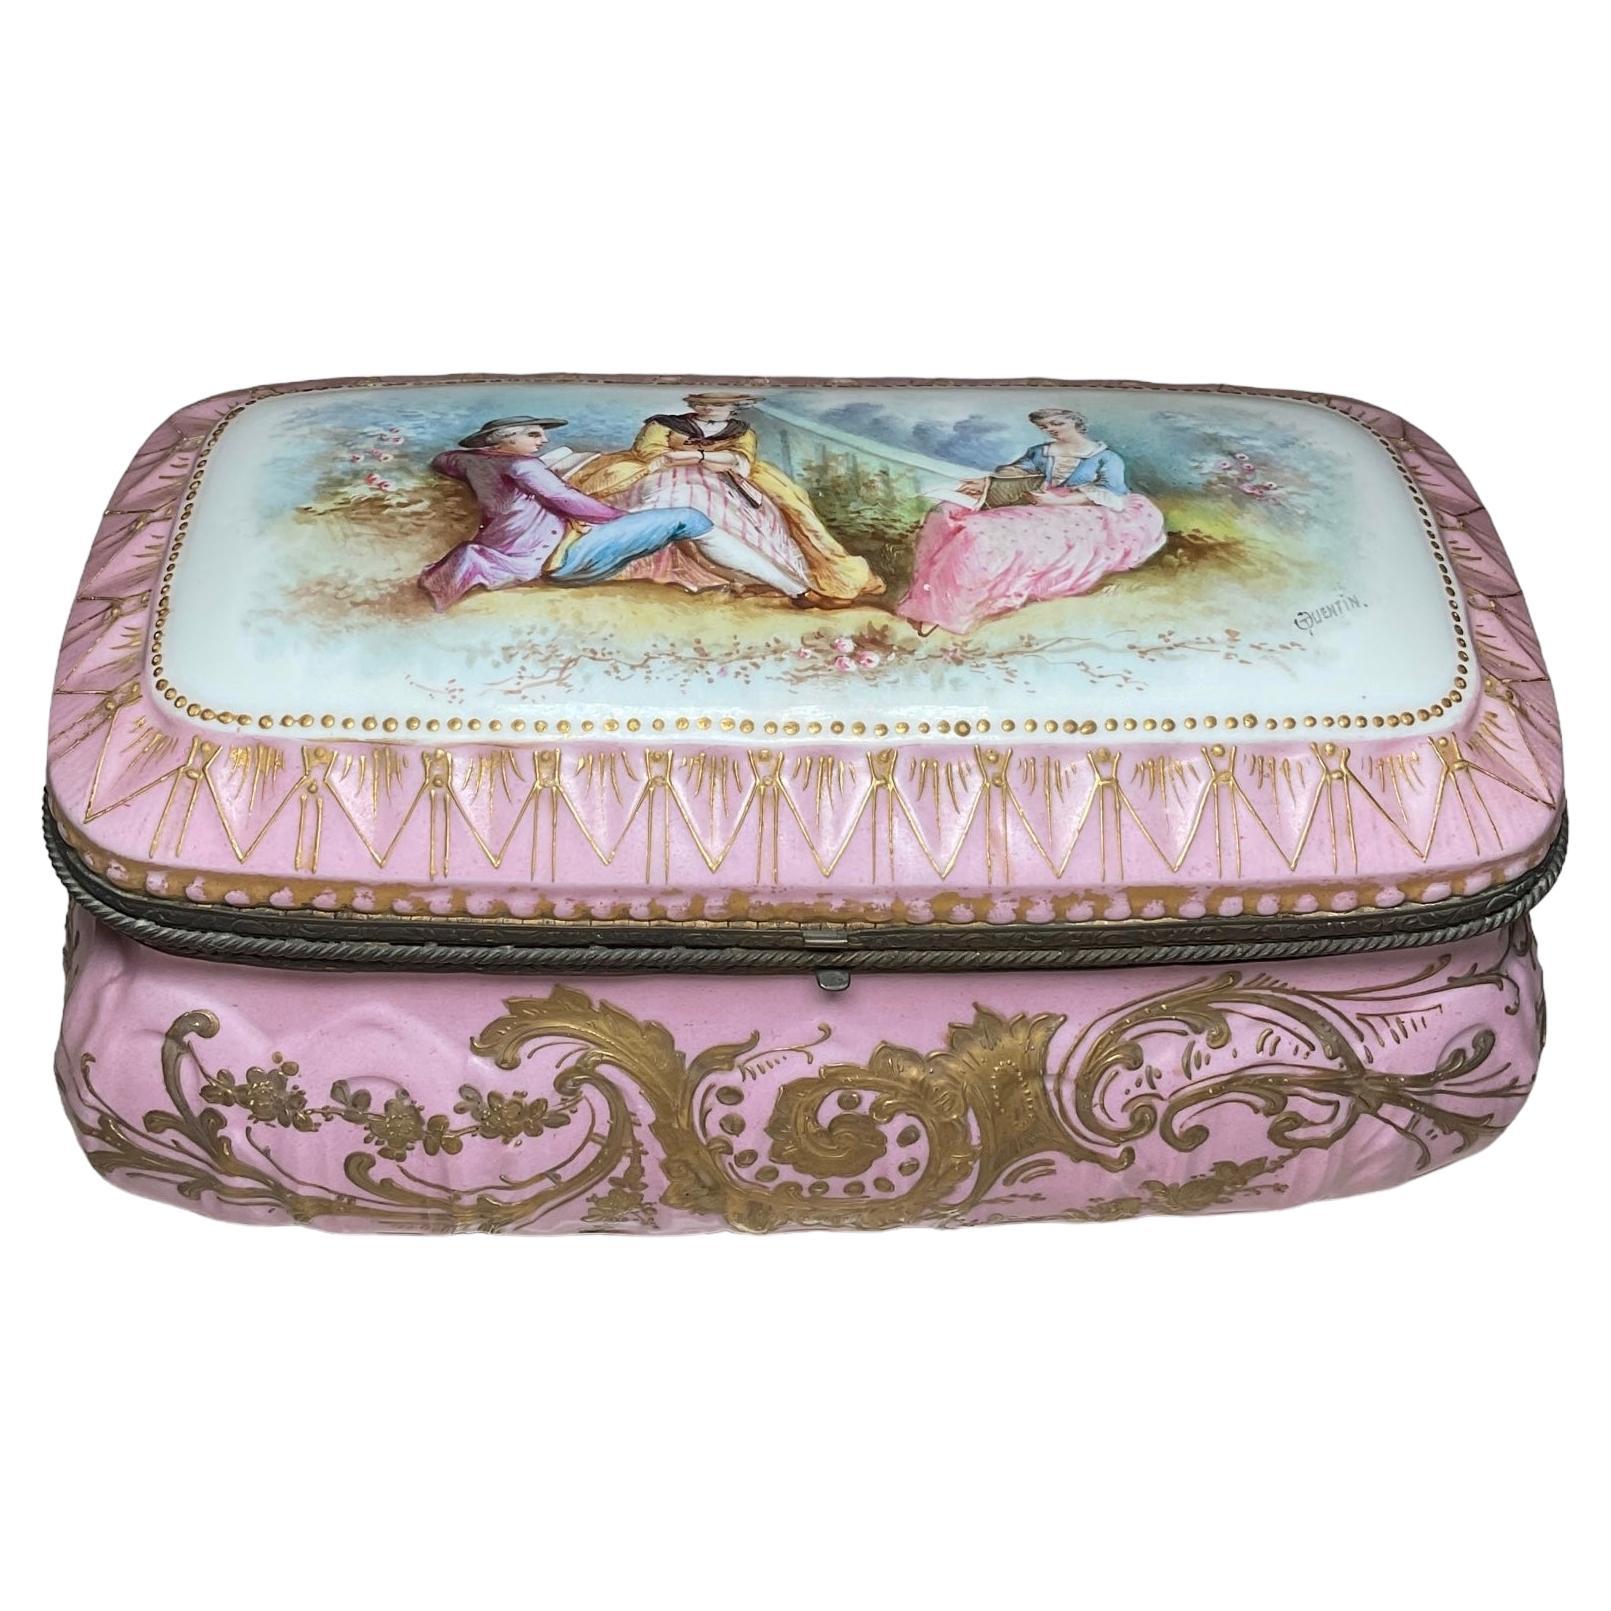 This is a Chateau de Tuileries hand painted porcelain rectangular casket box. It depicts a pastoral scene of a young couple and their chaperone over it’s hinged lid. The scene is framed by a pattern of gilt pink arrow tips. The side panels of the